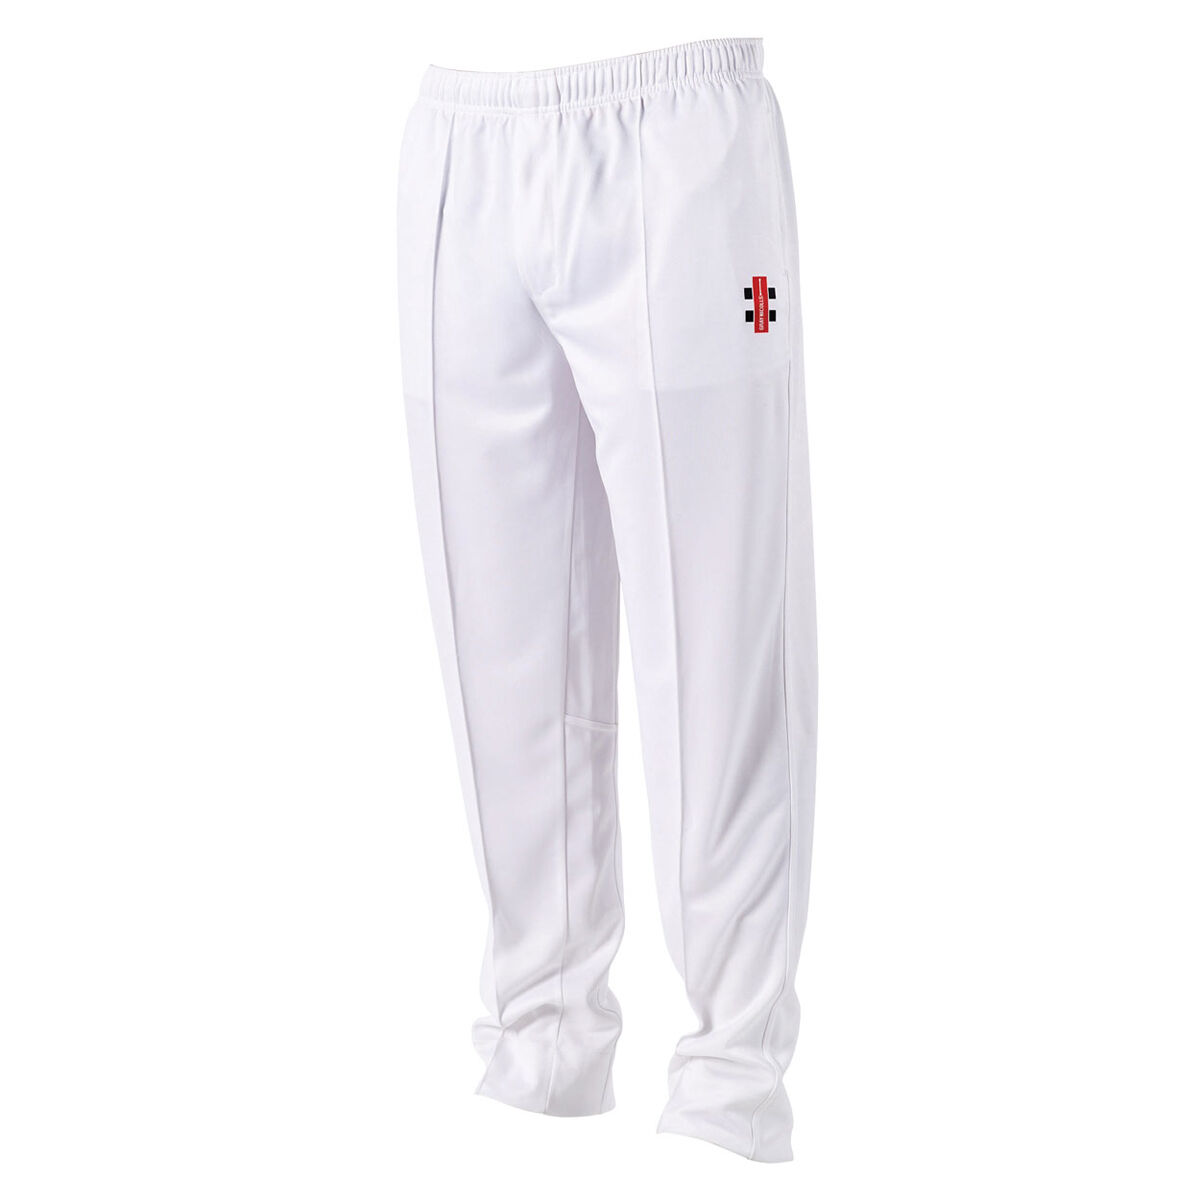 SG Cricket Pant SG Test XL Polyester Cricket Pant XL OffWhite   Amazonin Clothing  Accessories